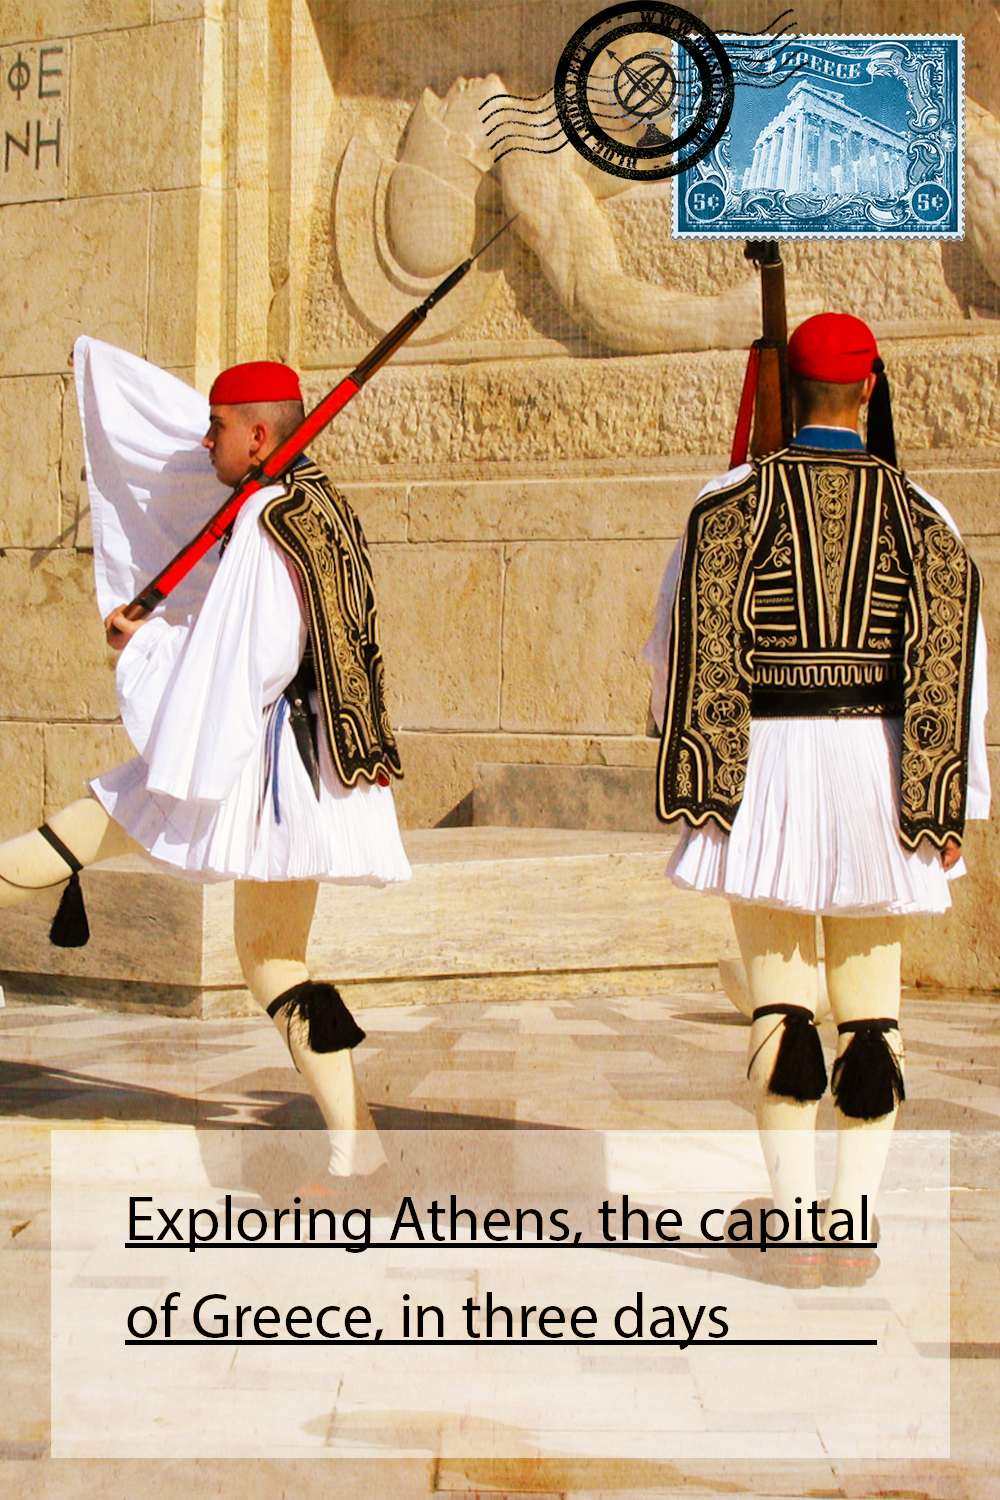 Exploring Athens, the capital of Greece, in three days